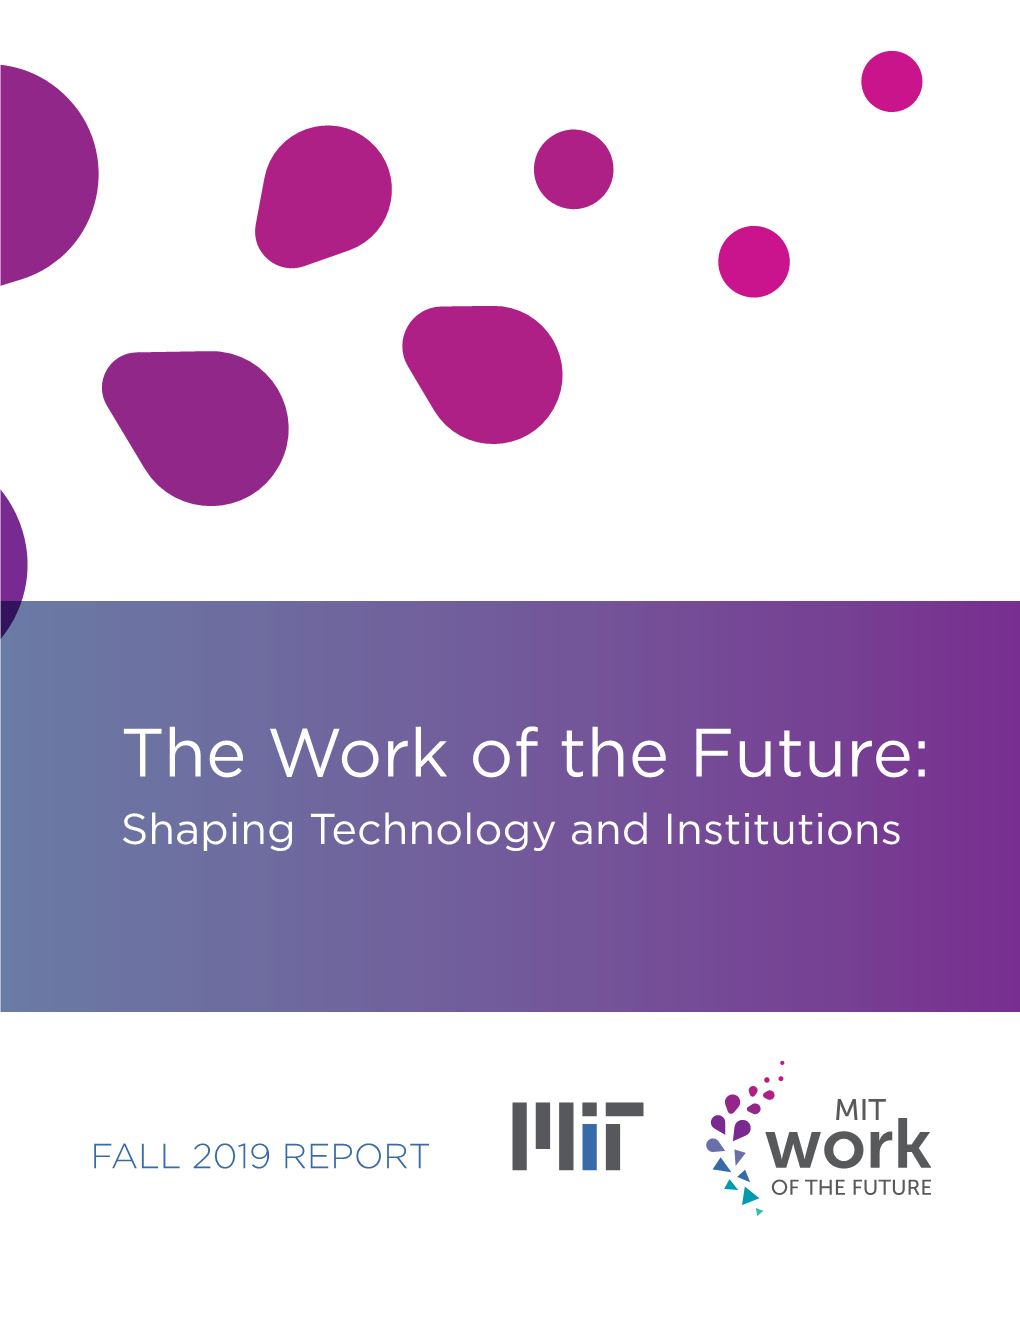 MIT the Work of the Future: Shaping Technology and Institutions